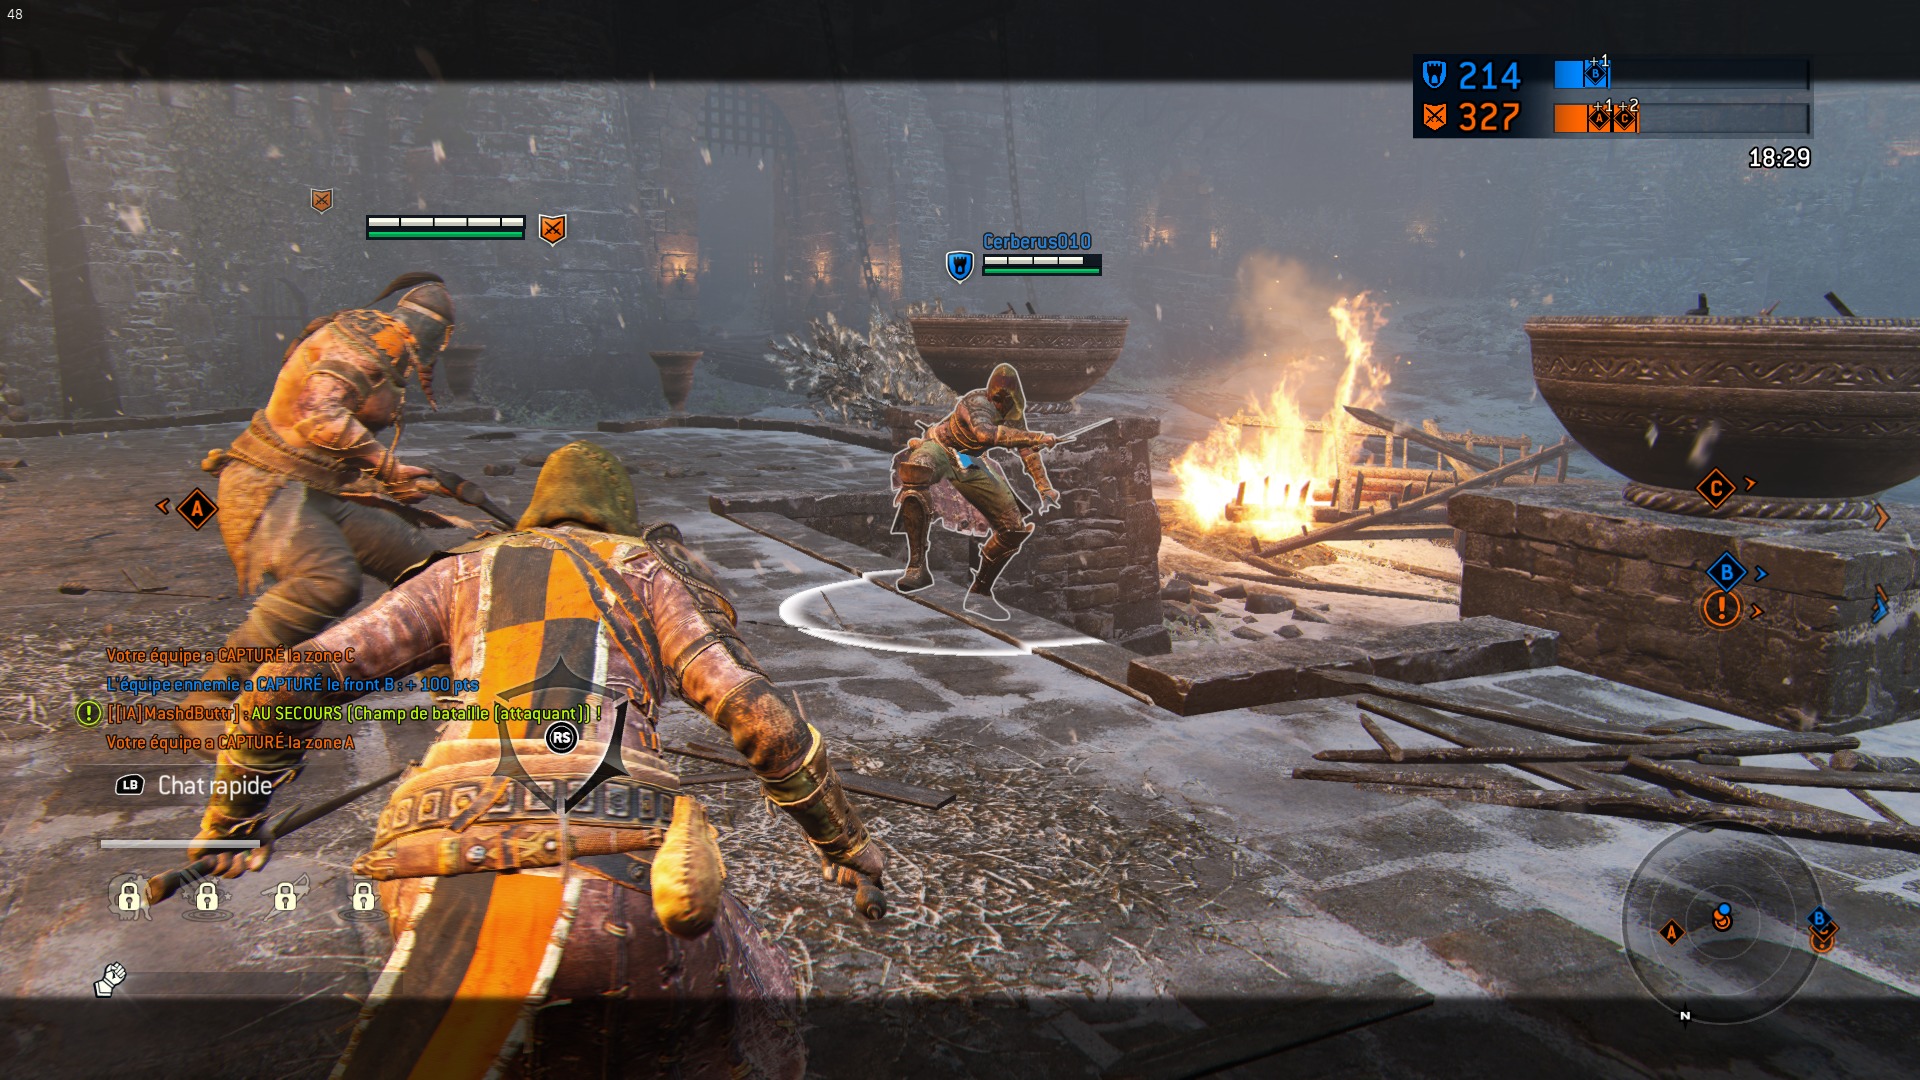 Test For Honor combat